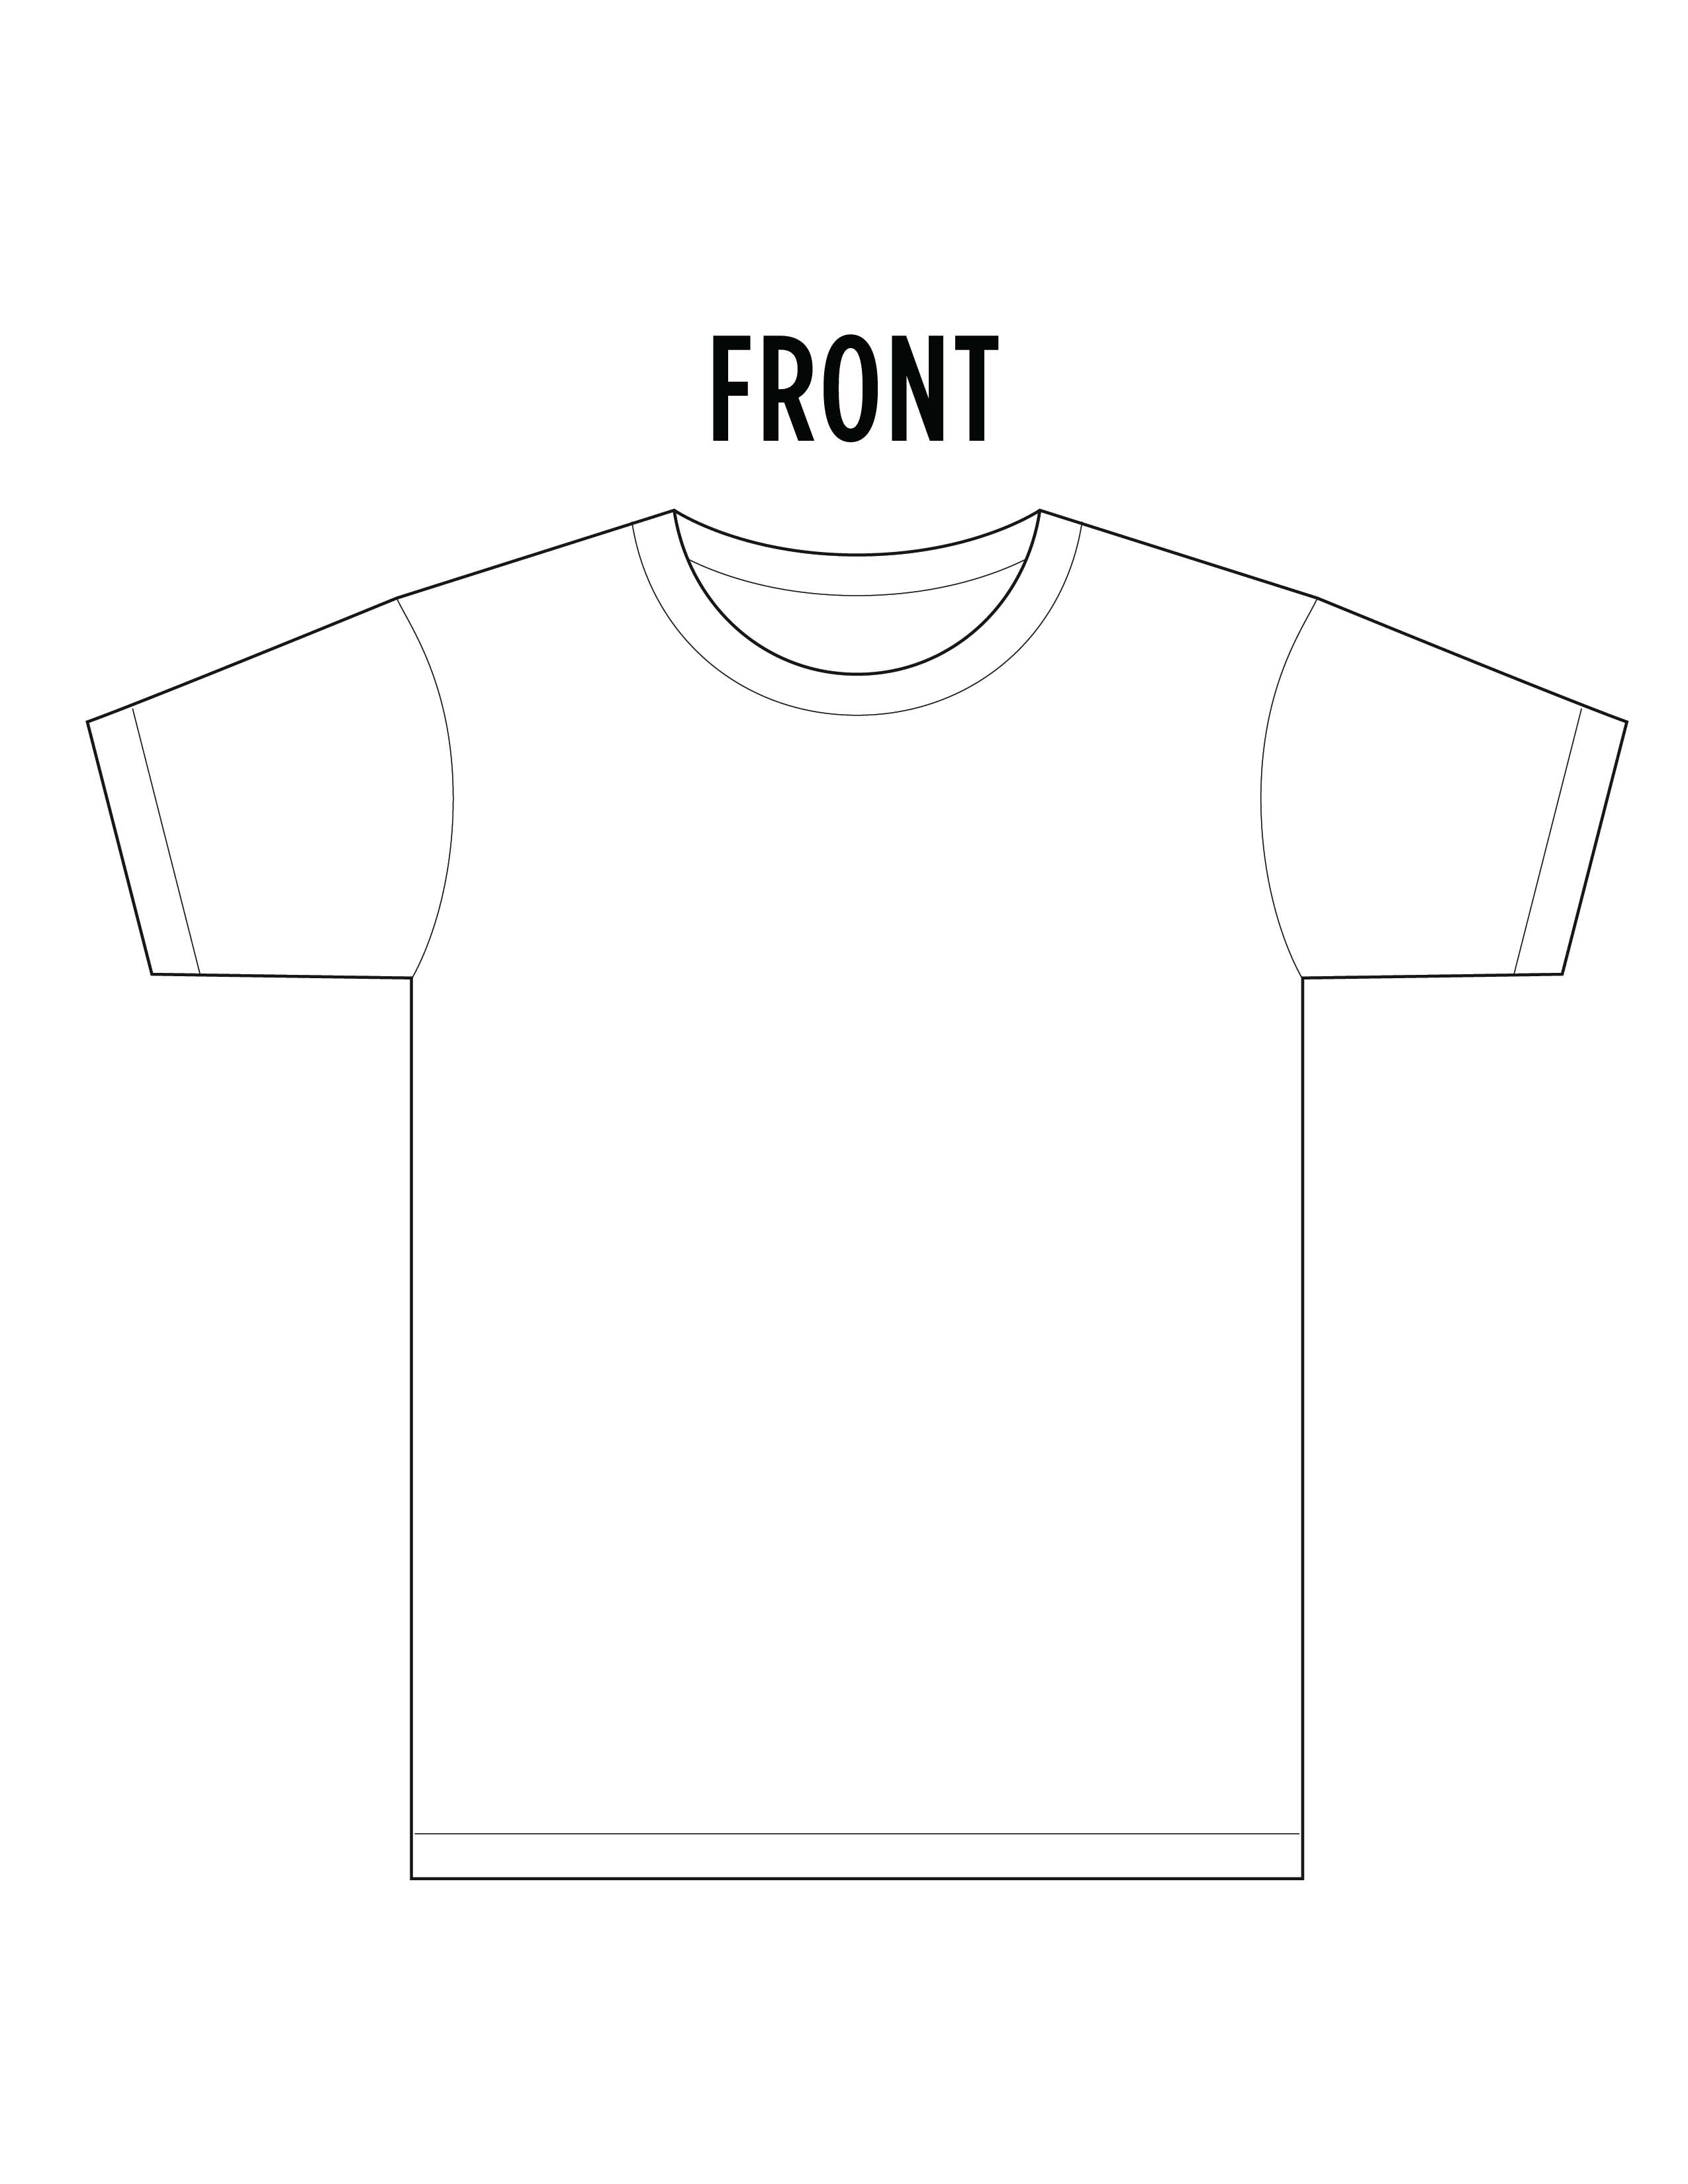 11 TShirt Template Front And Back Images TShirt Template Back